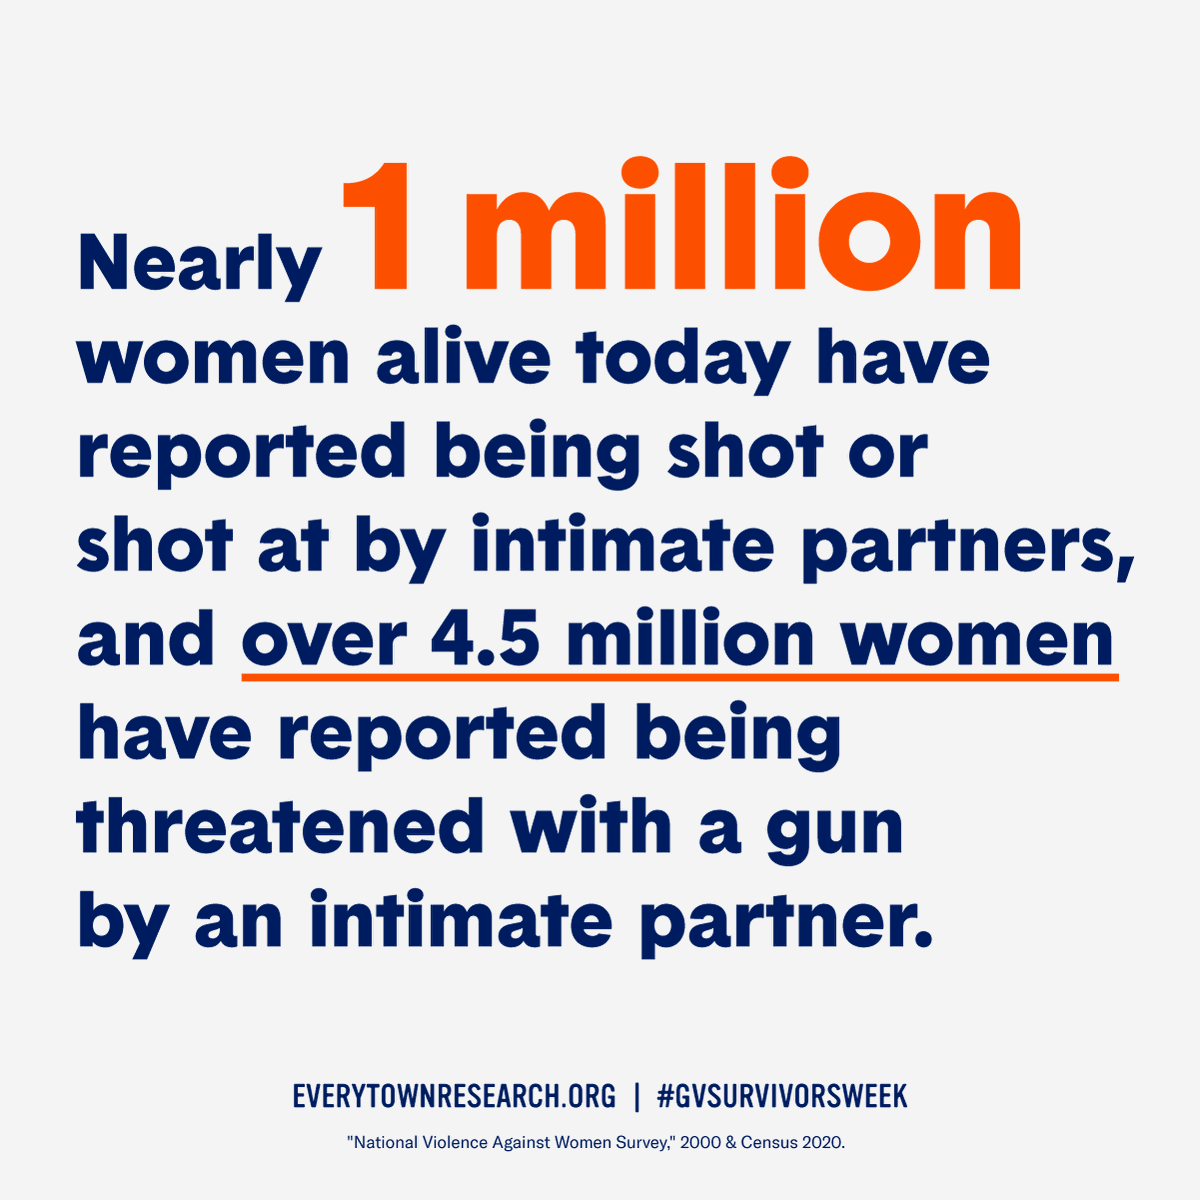 A woman is five times more likely to be murdered when her abuser has access to a gun. To reduce #dvhomicide, we must ensure that people who abuse their intimate partners or family do not have access to firearms.

#GVSurvivorsWeek #domesticviolence #wrcdv #firearms